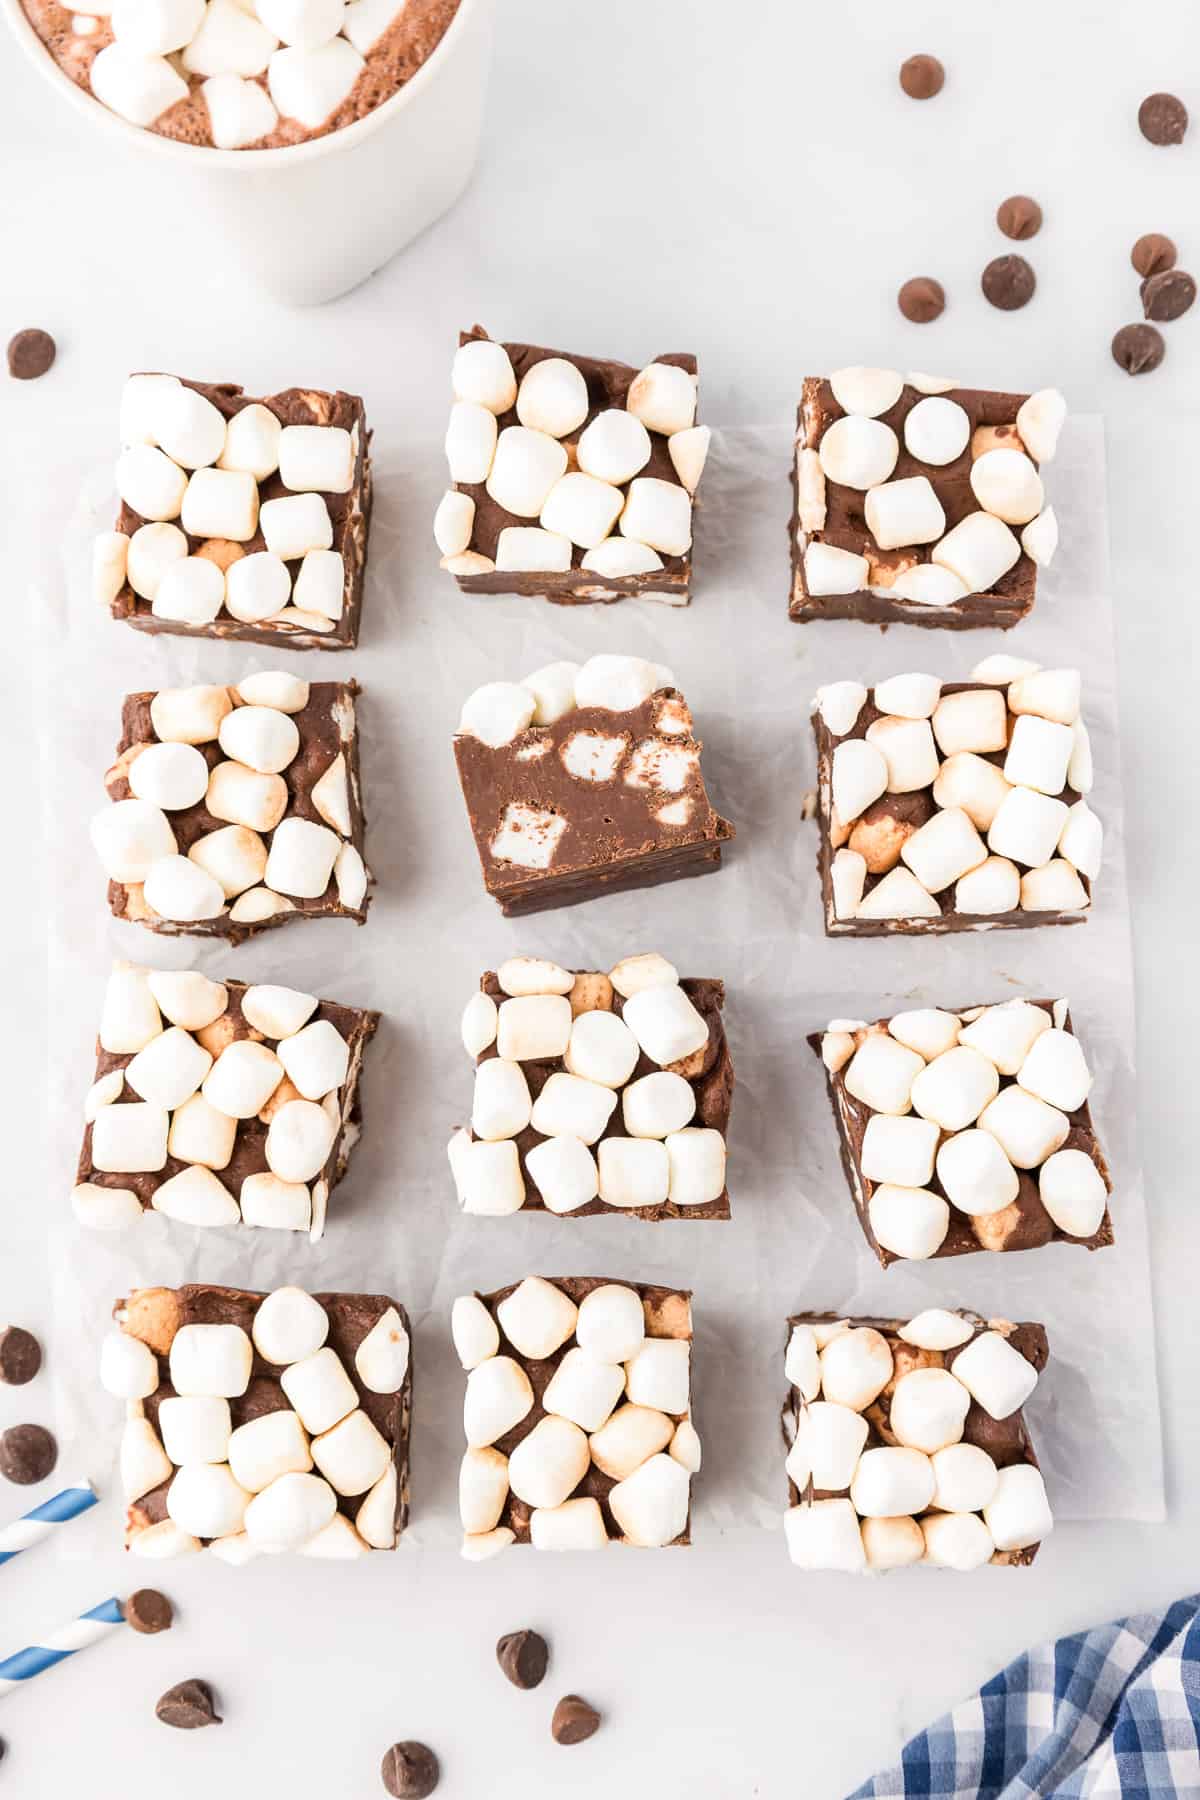 Hot chocolate fudge sliced into squares on a counter from overhead spaced out.